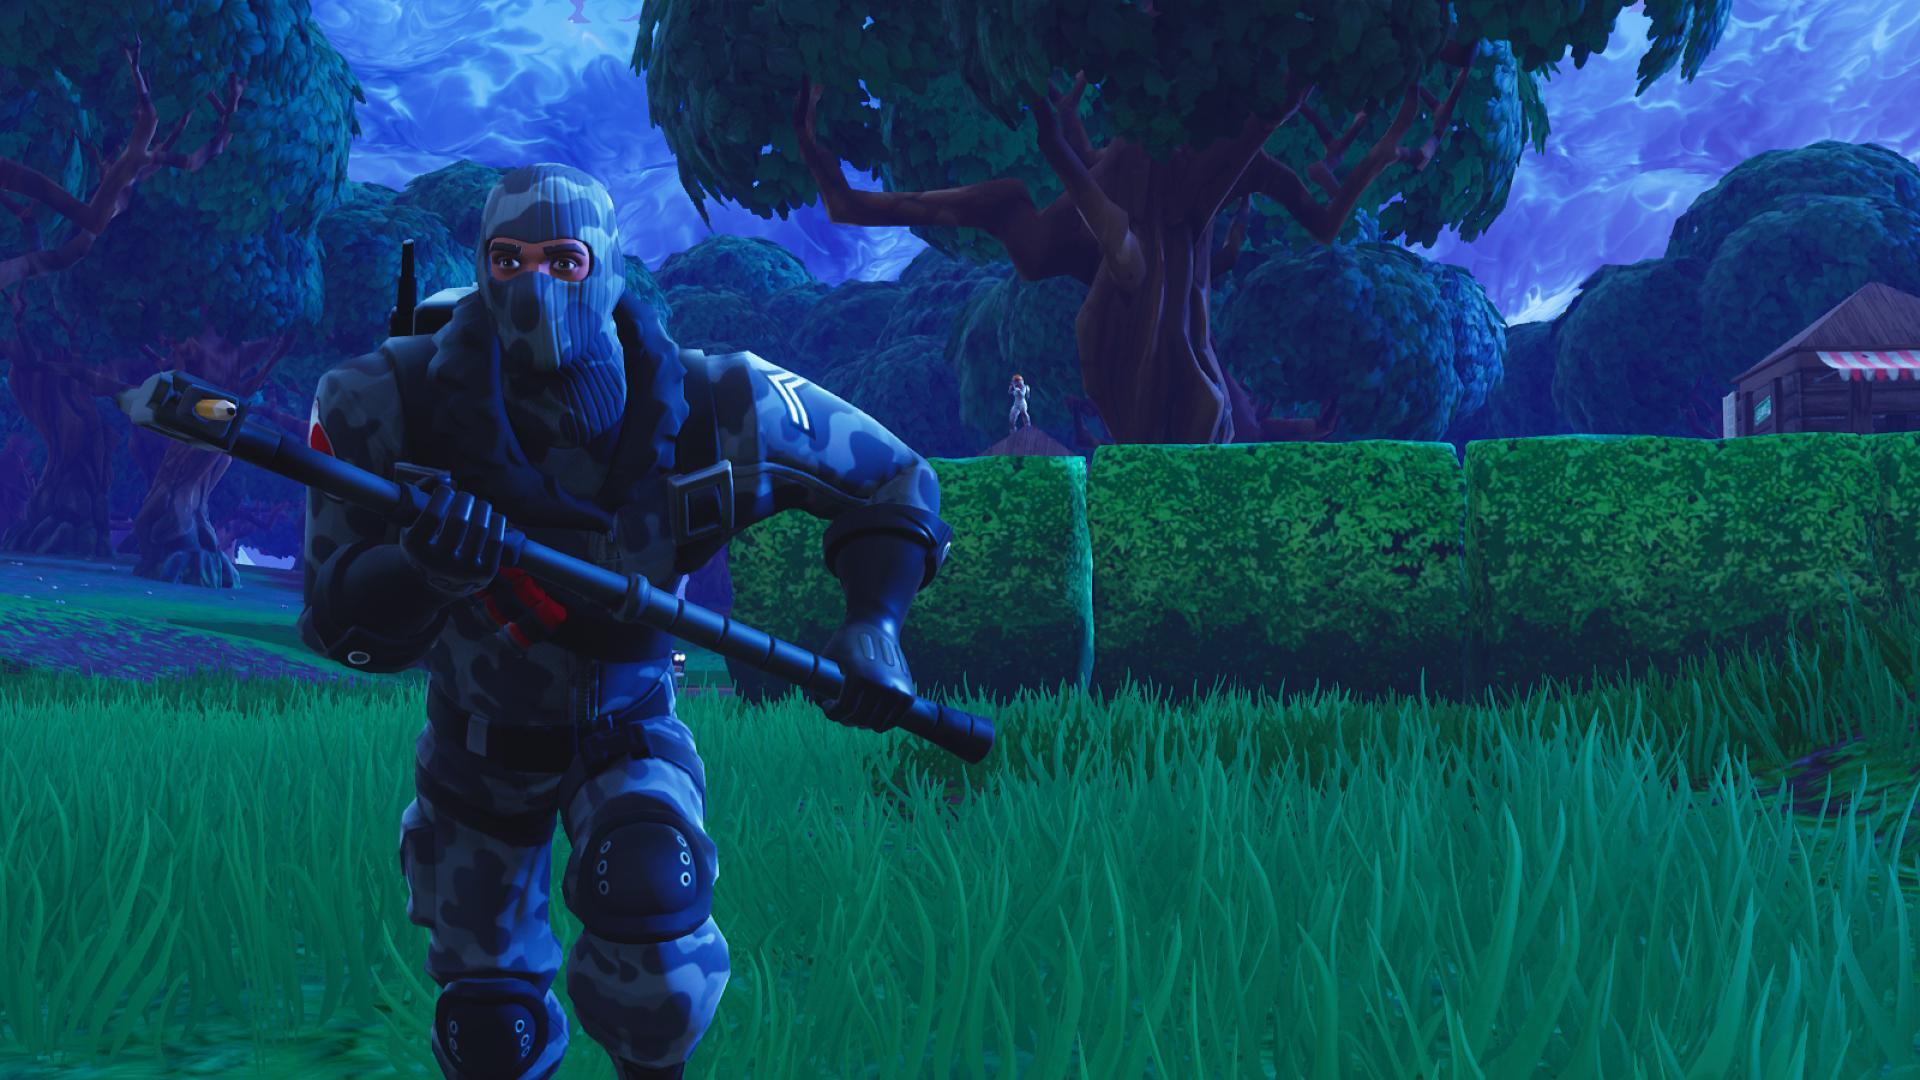 HD Wallpaper Of Havoc From Fortnite